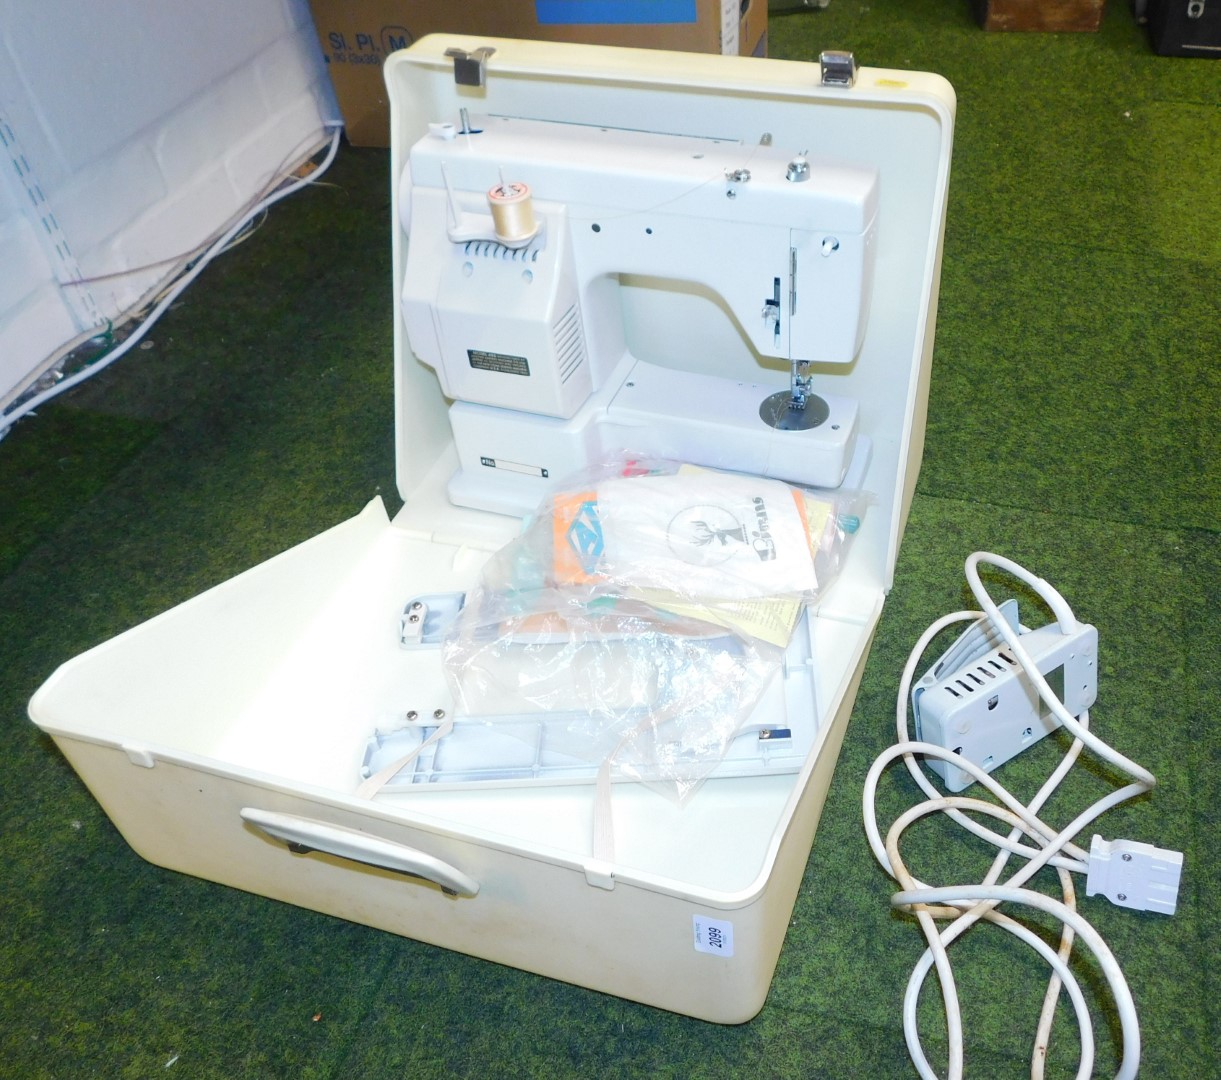 A Japanese sewing machine, cased, model number 696, manufactured by the Janome Sewing Machine Compan